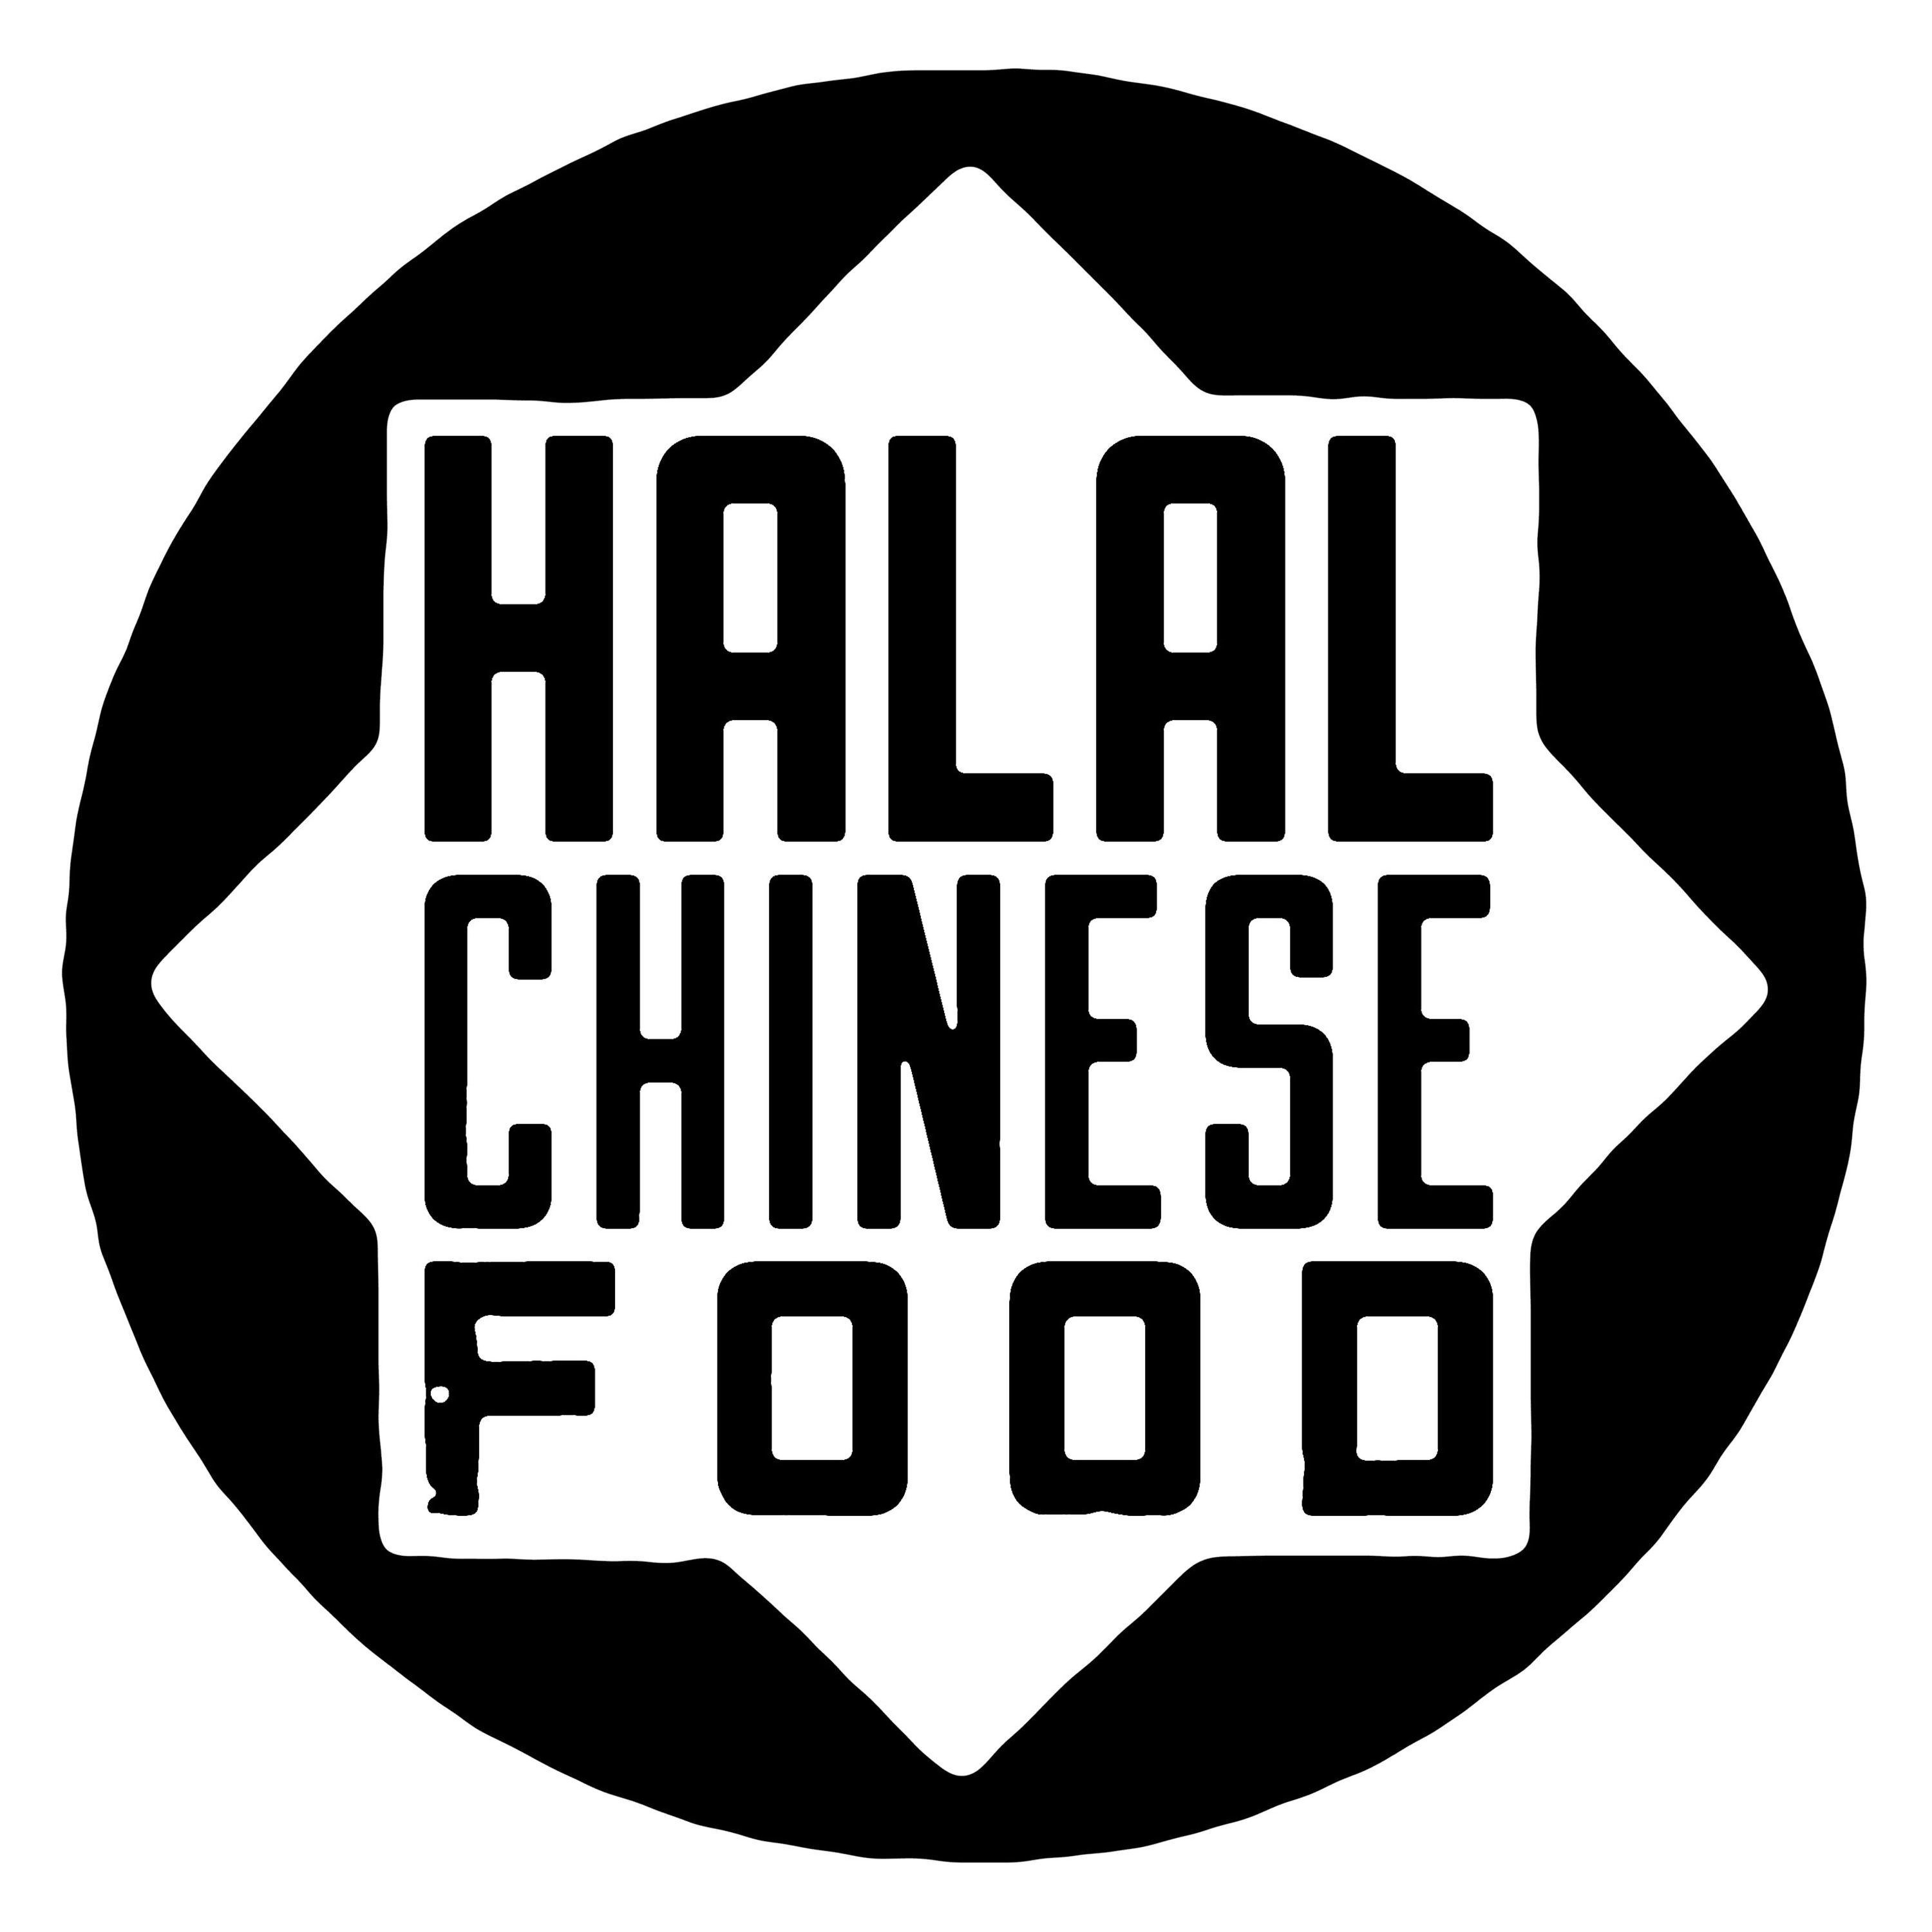  THE IMAGE IS A BLACK CIRCLE WITH A WHITE 8 POINT STAR INSIDE OF IT THAT SAYS HALAL CHINESE FOOD.